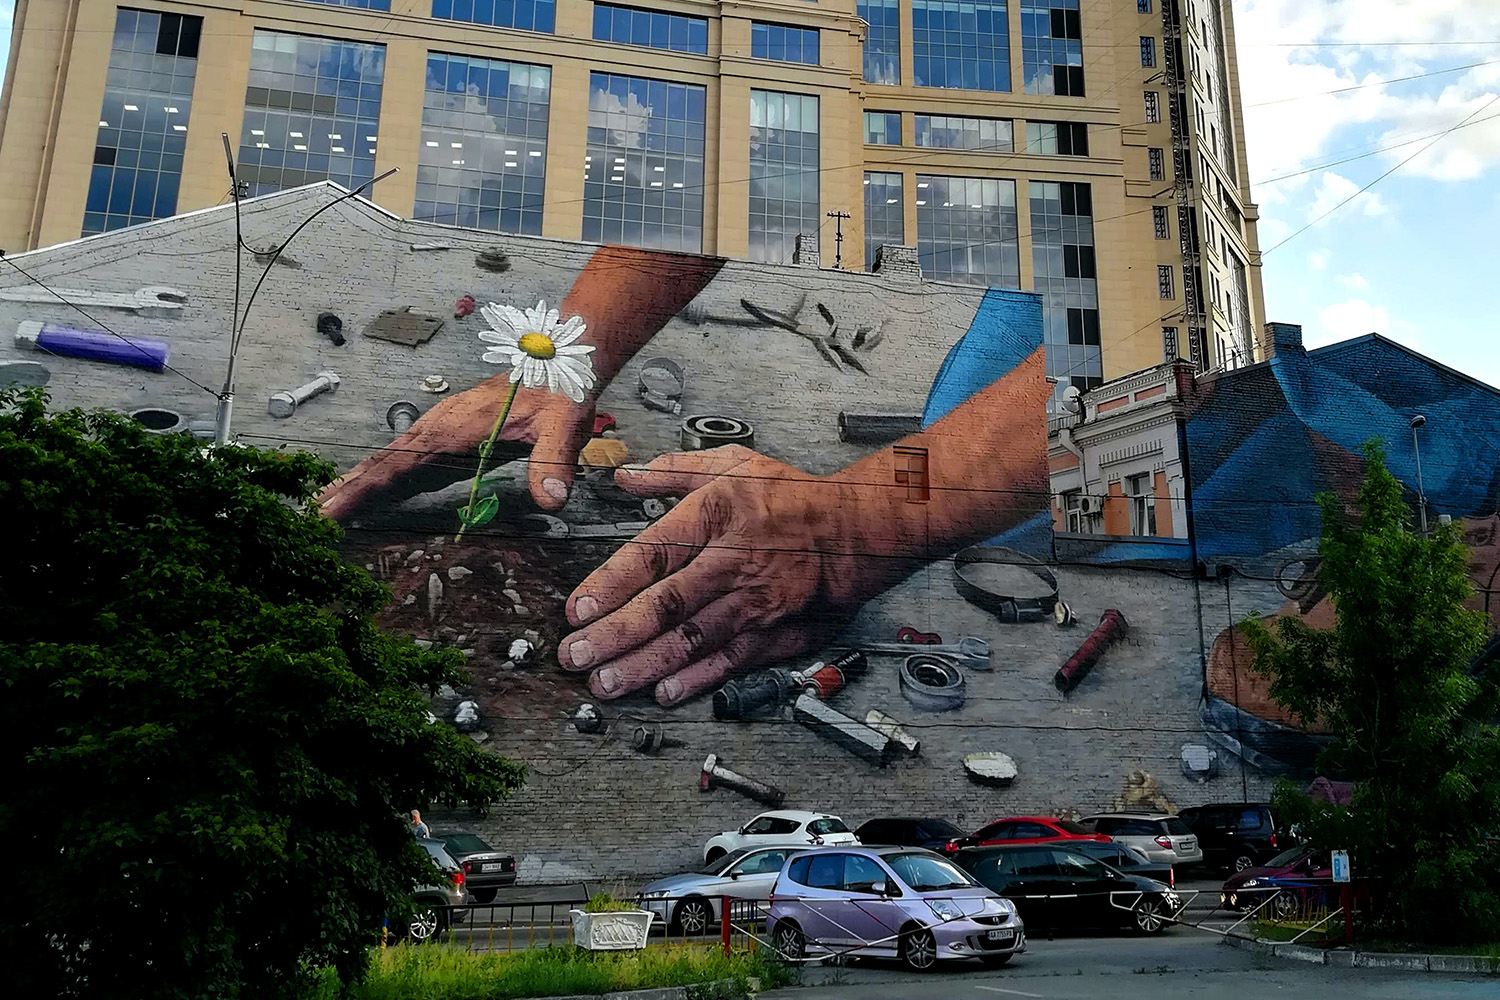 Mural painting in Kyiv of two hands planting a flower in cracked asphalt.